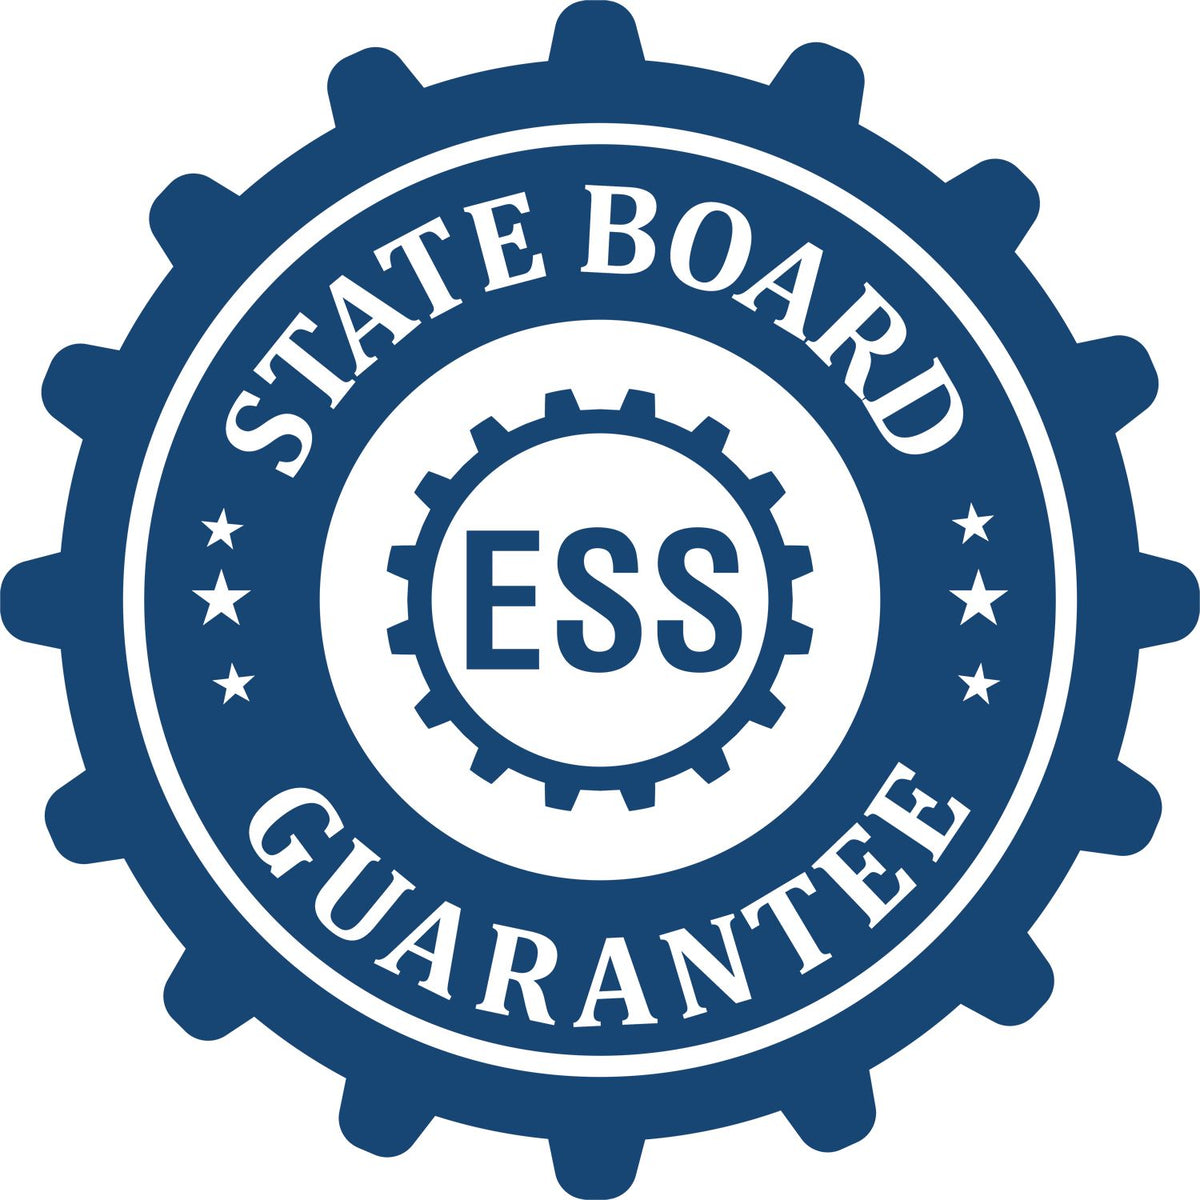 An emblem in a gear shape illustrating a state board guarantee for the Wyoming Geologist Desk Seal